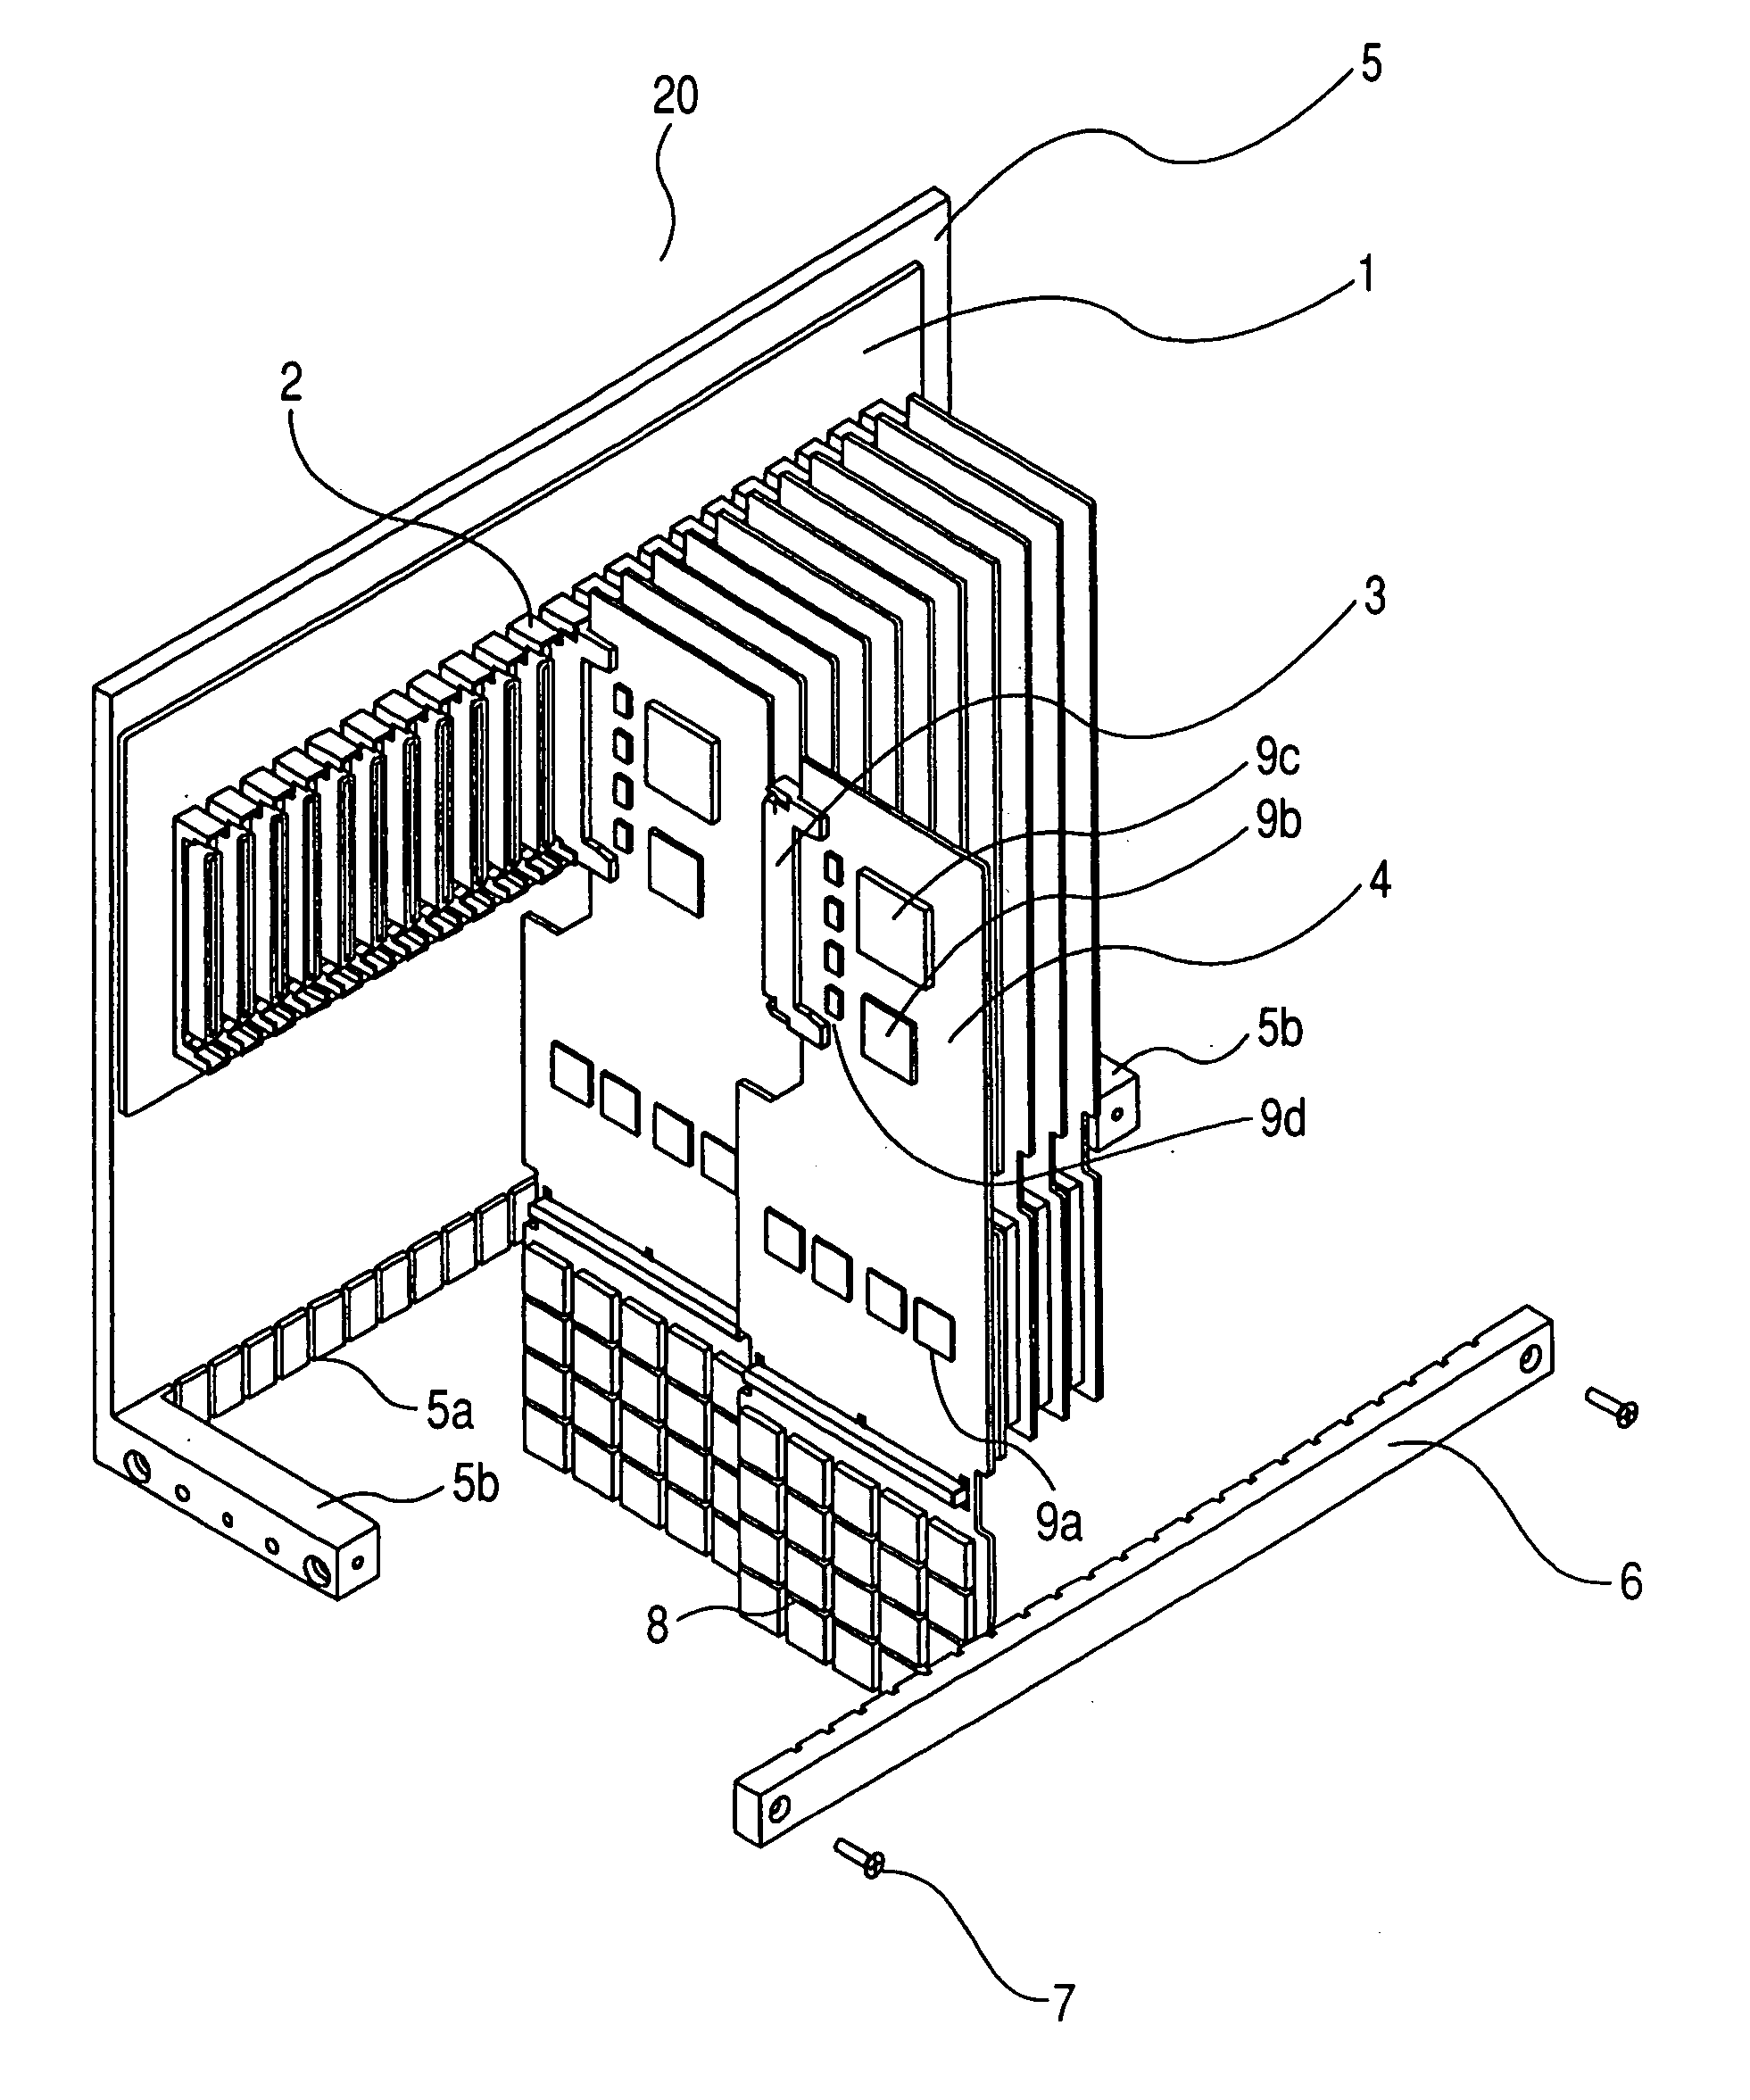 Structure for mounting printed board and nuclear medicine diagnosis system